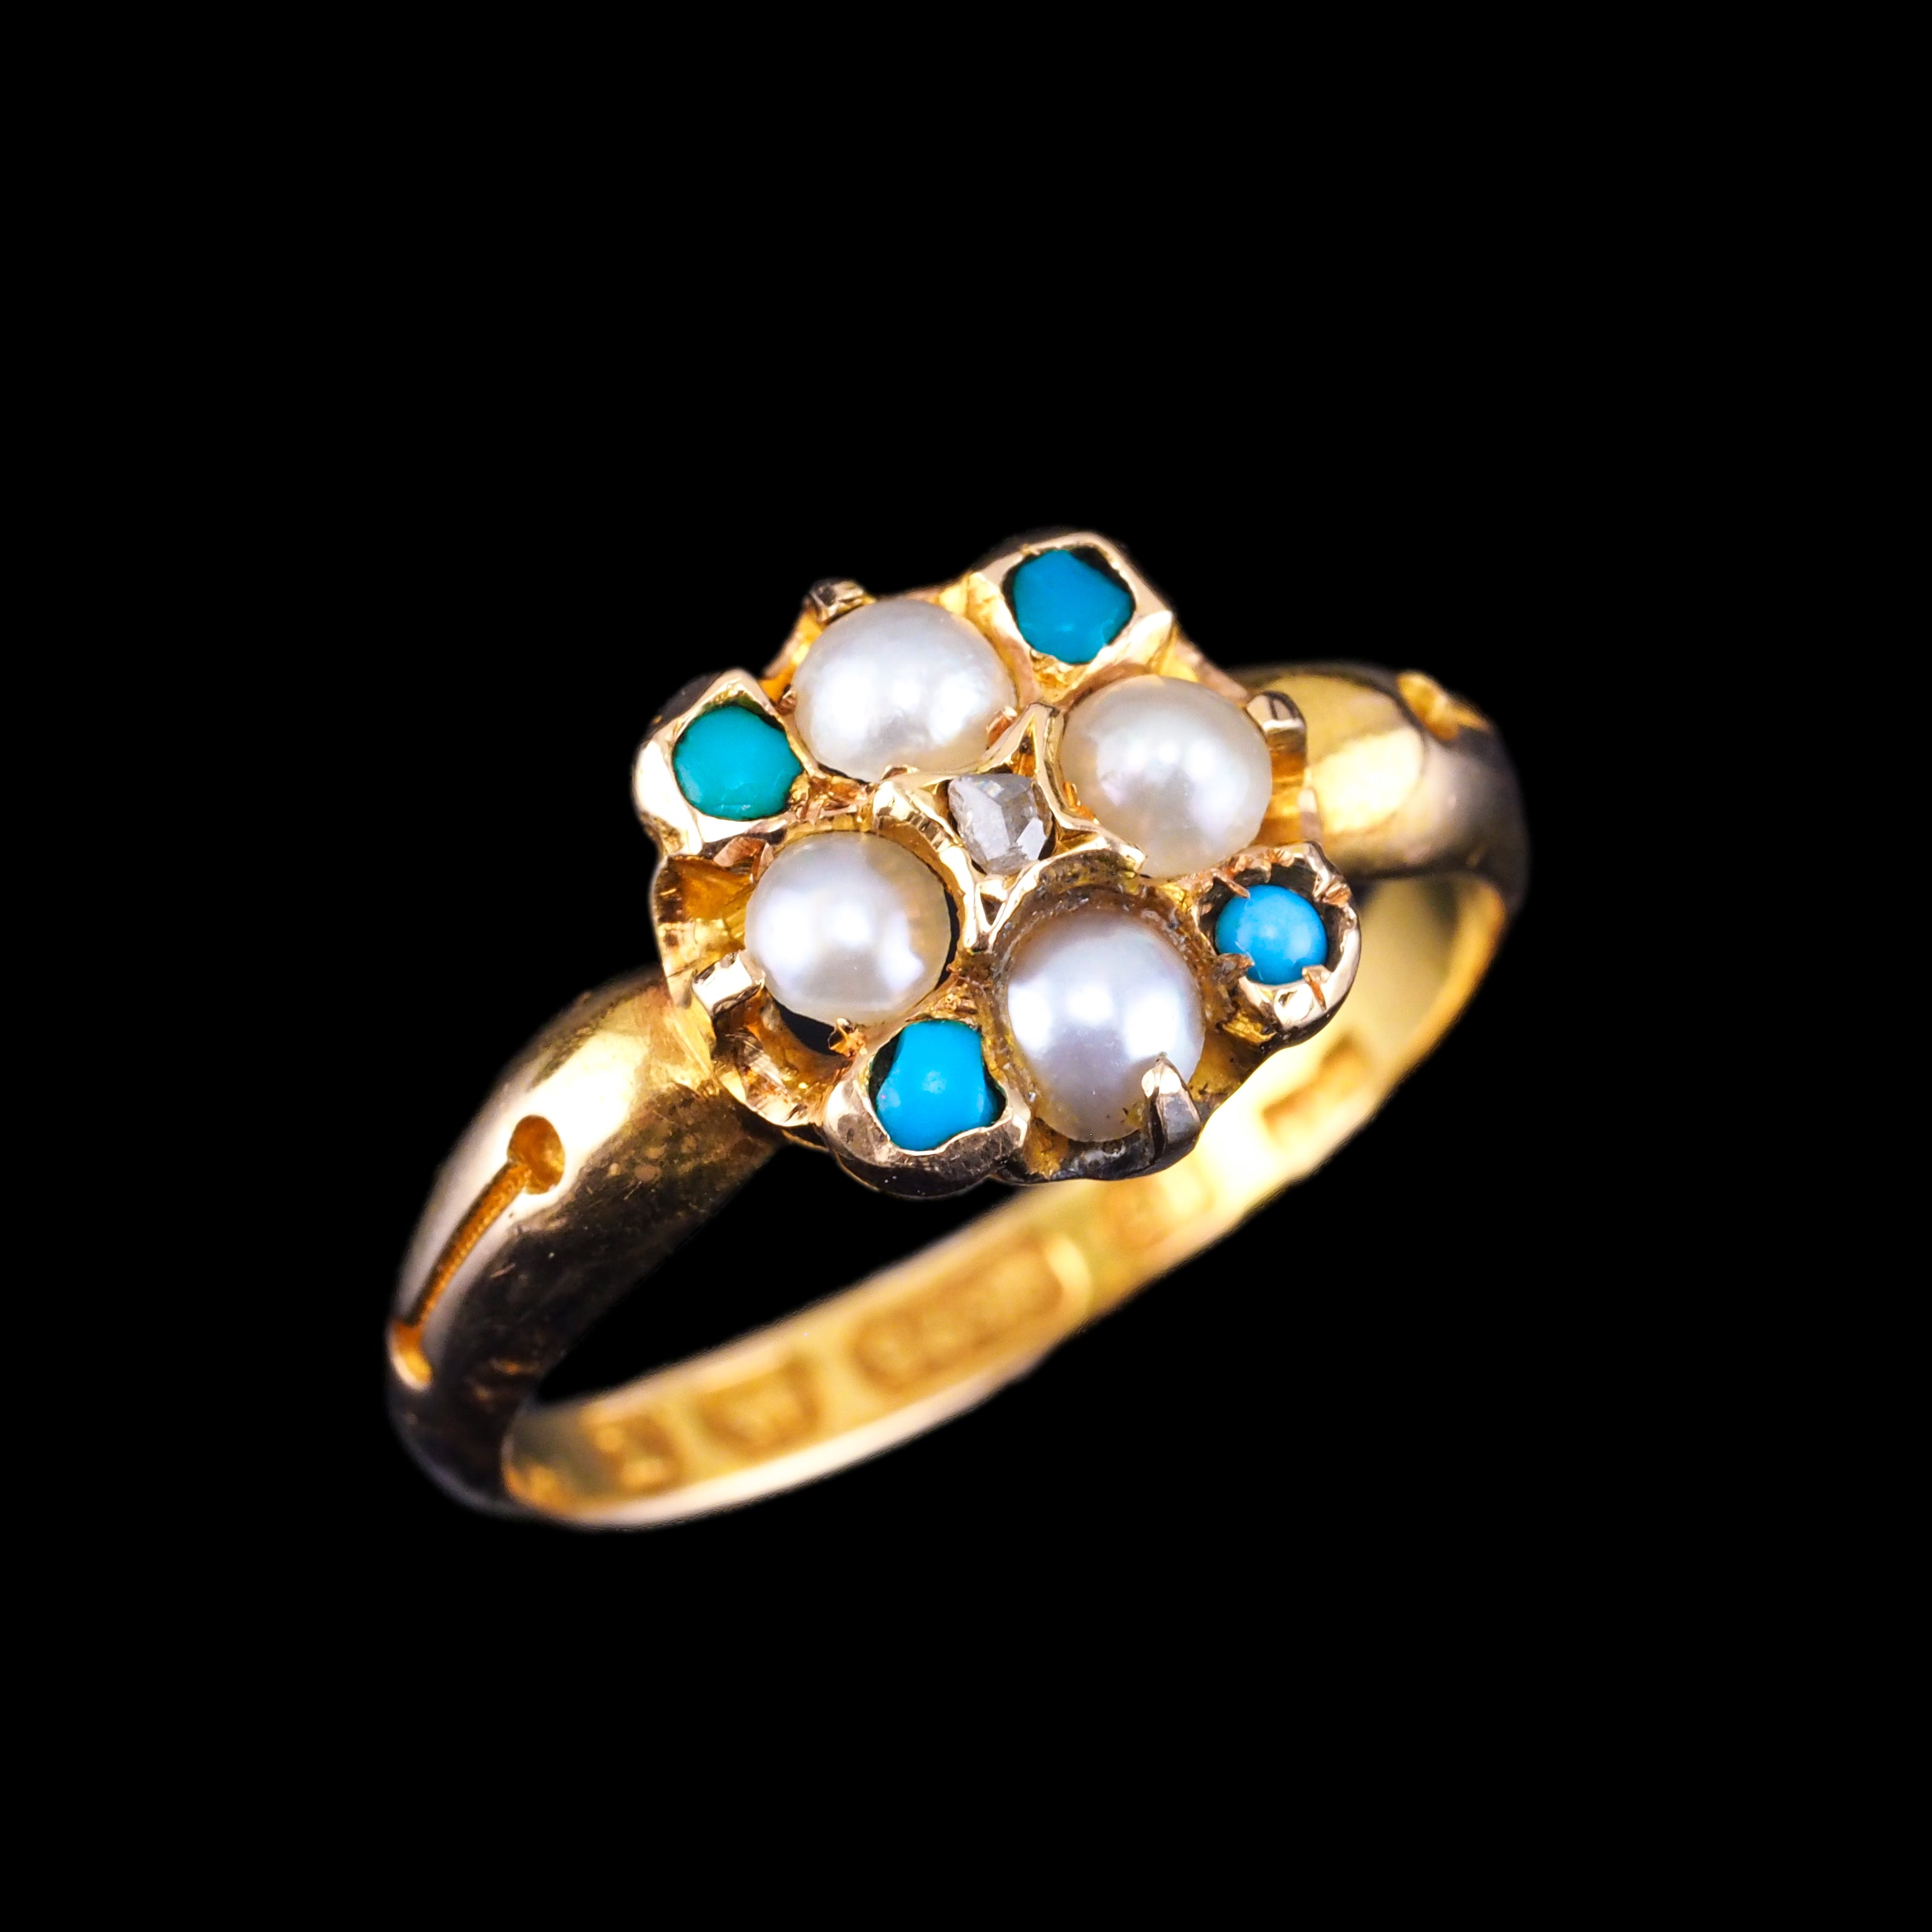 Antique Turquoise, Diamond & Pearl Ring 15ct Gold Victorian 